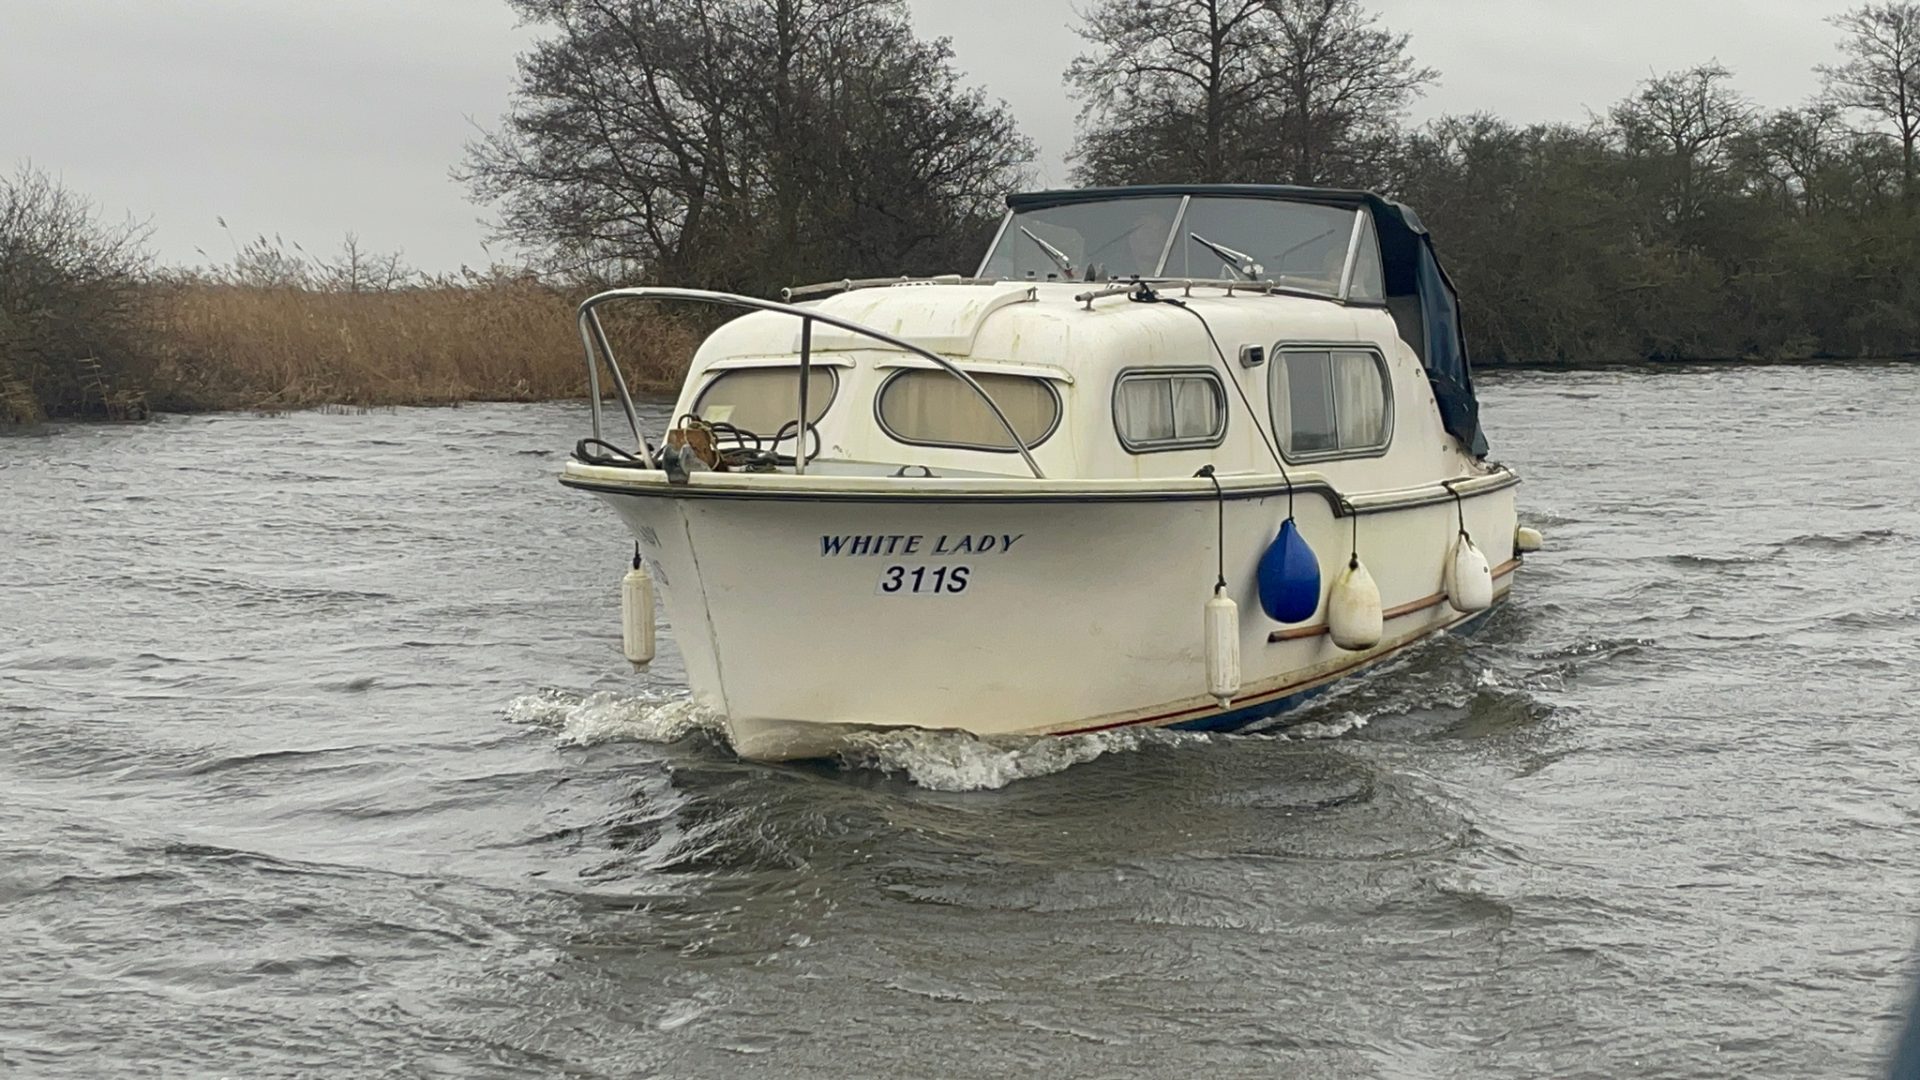 Test run from Ranworth to Horning